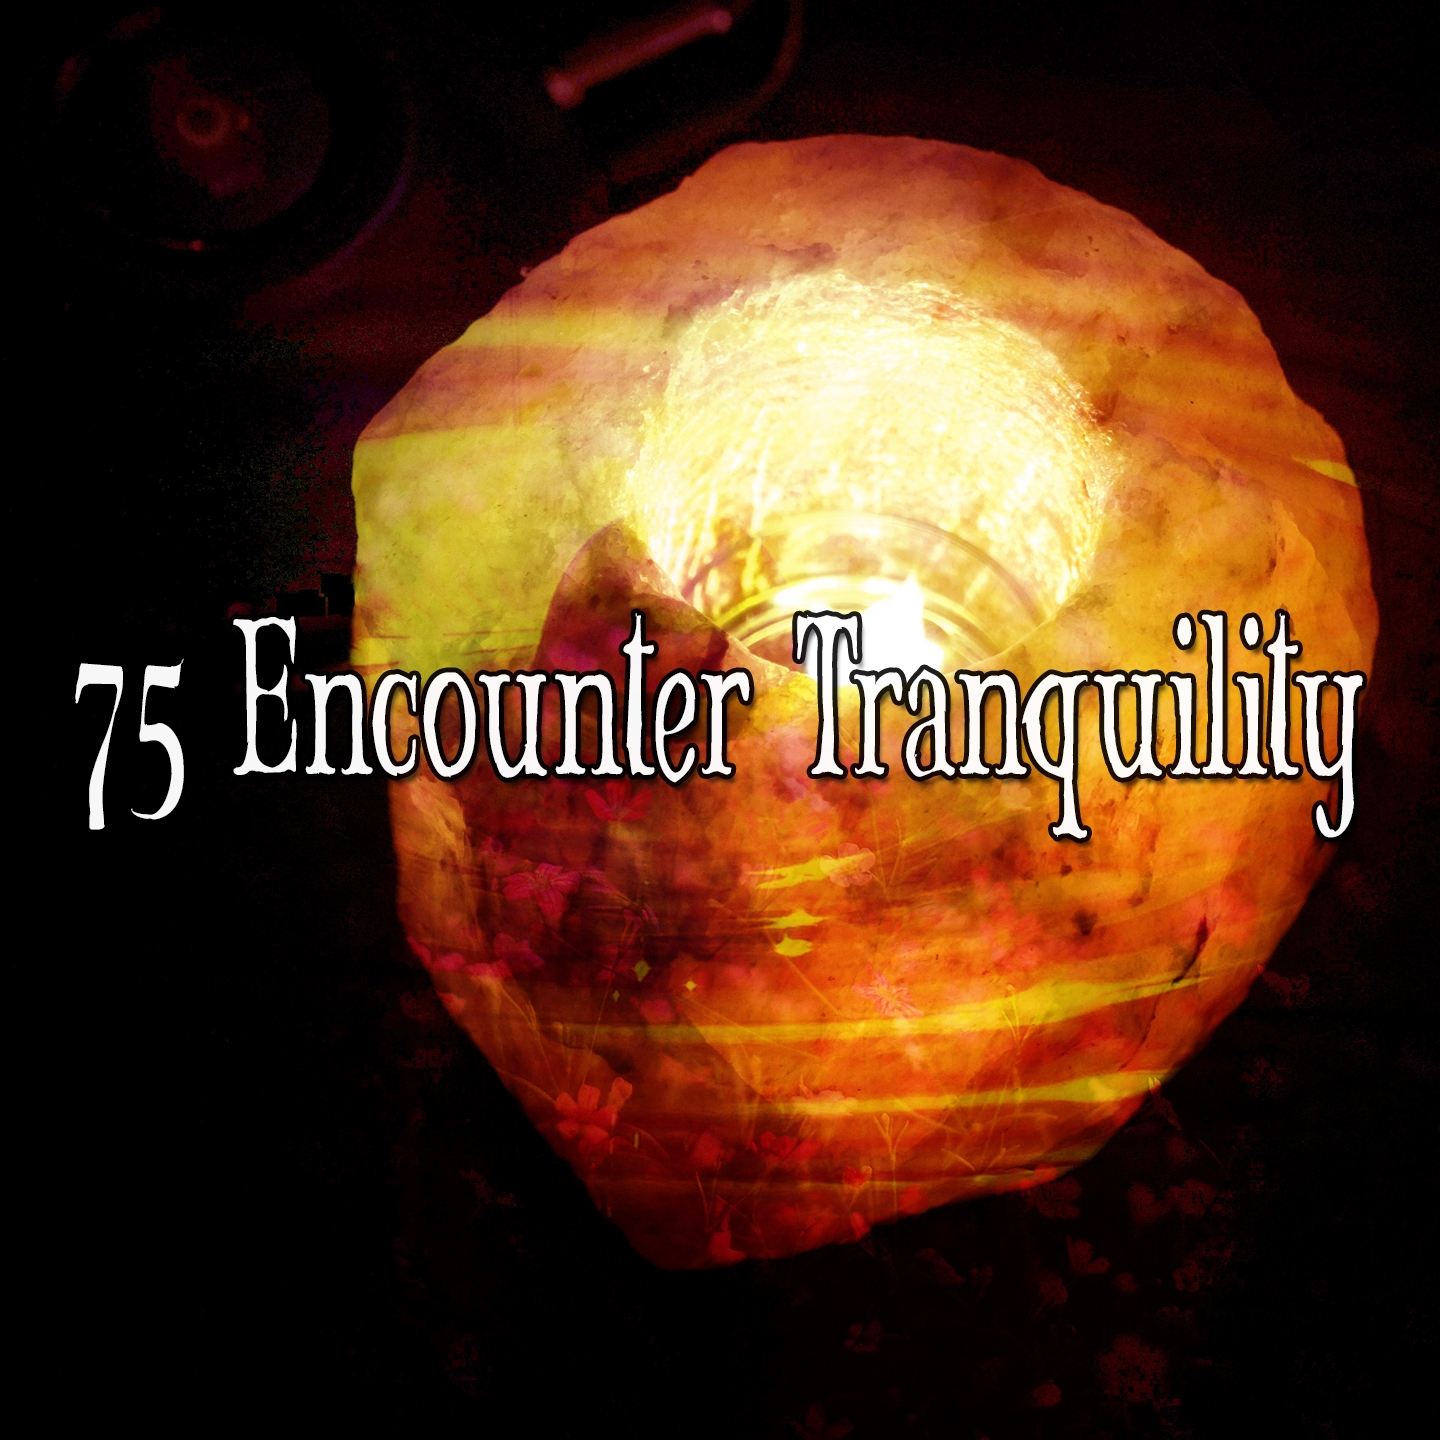 75 Encounter Tranquility